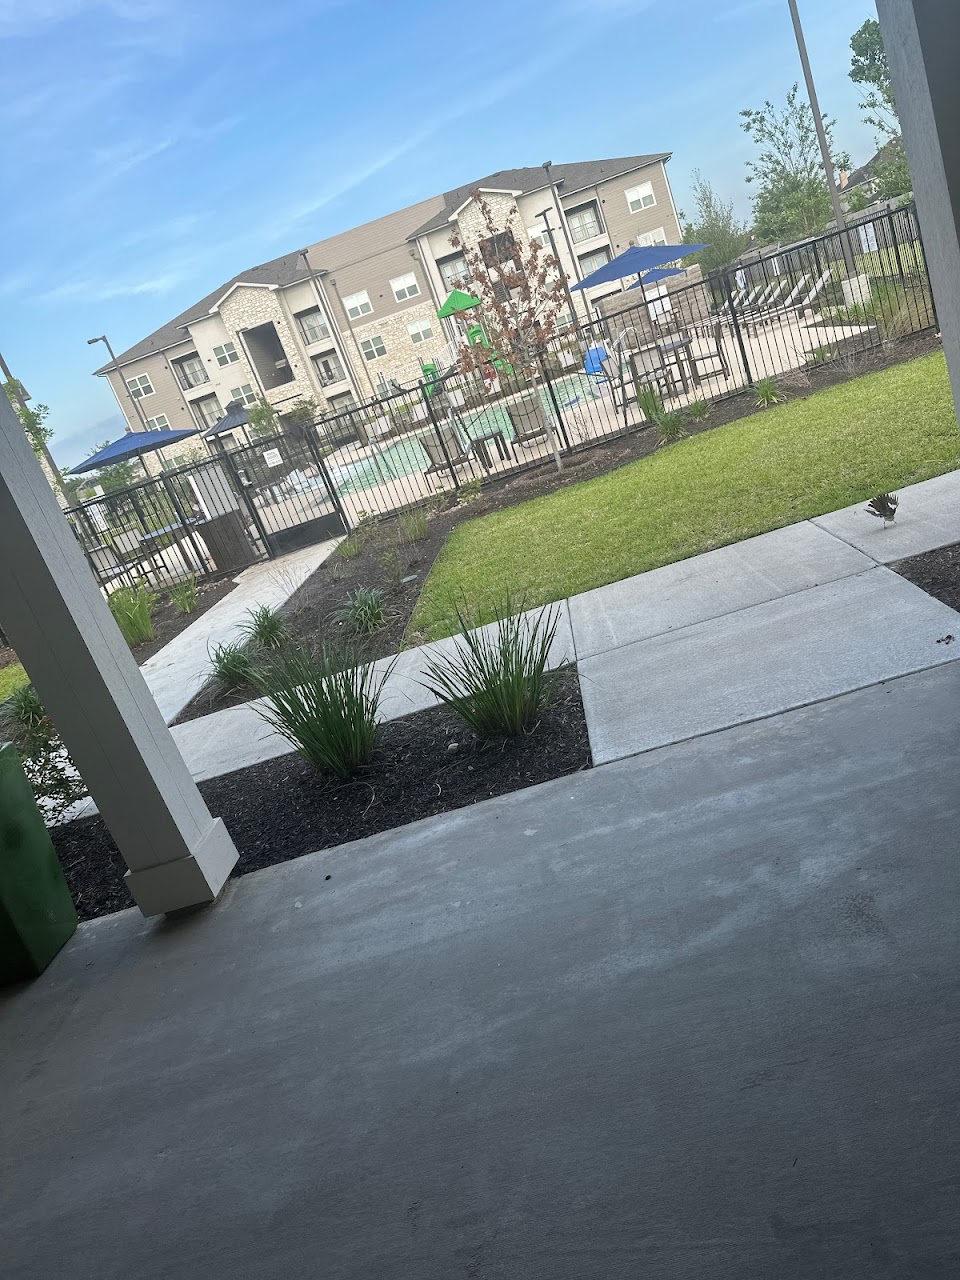 Photo of THE HOLLOWS. Affordable housing located at SEC OF WALLISVILLE RD. AND DELL DALE ST. CHANNELVIEW, TX 77530